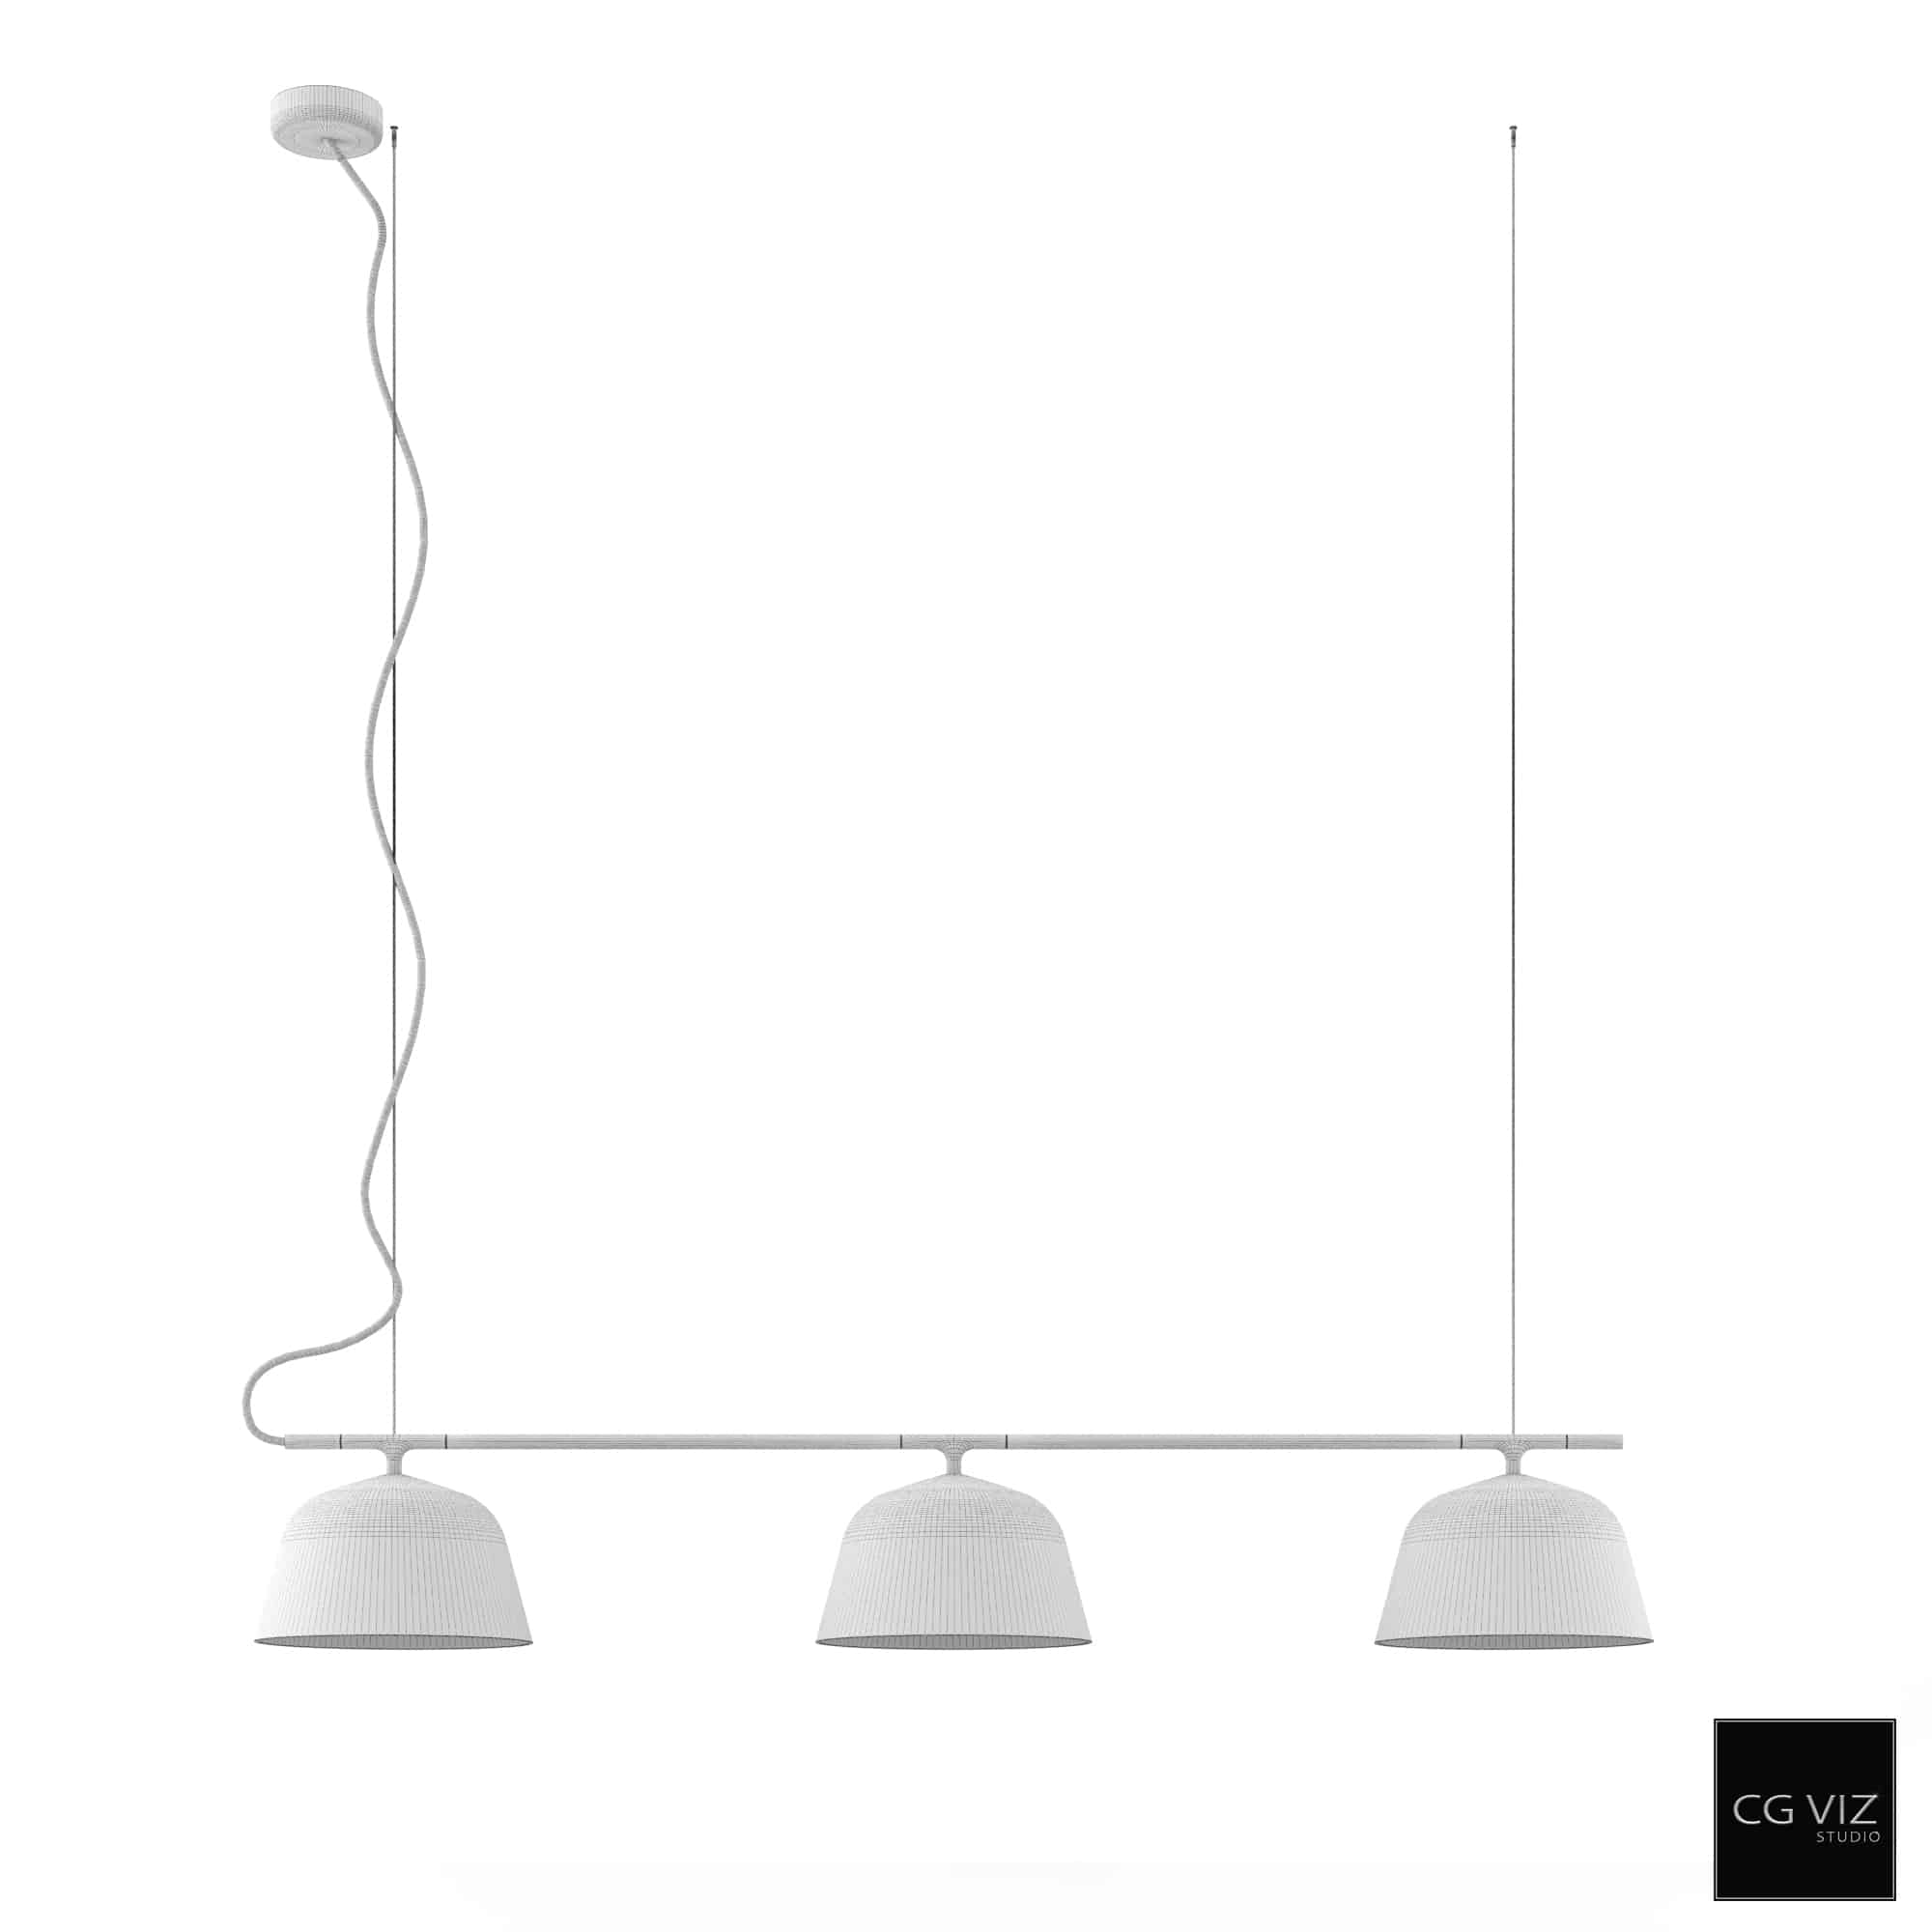 Wireframe Structure: Dive into the intricate structure of our Muuto Ambit Rail Lamp.